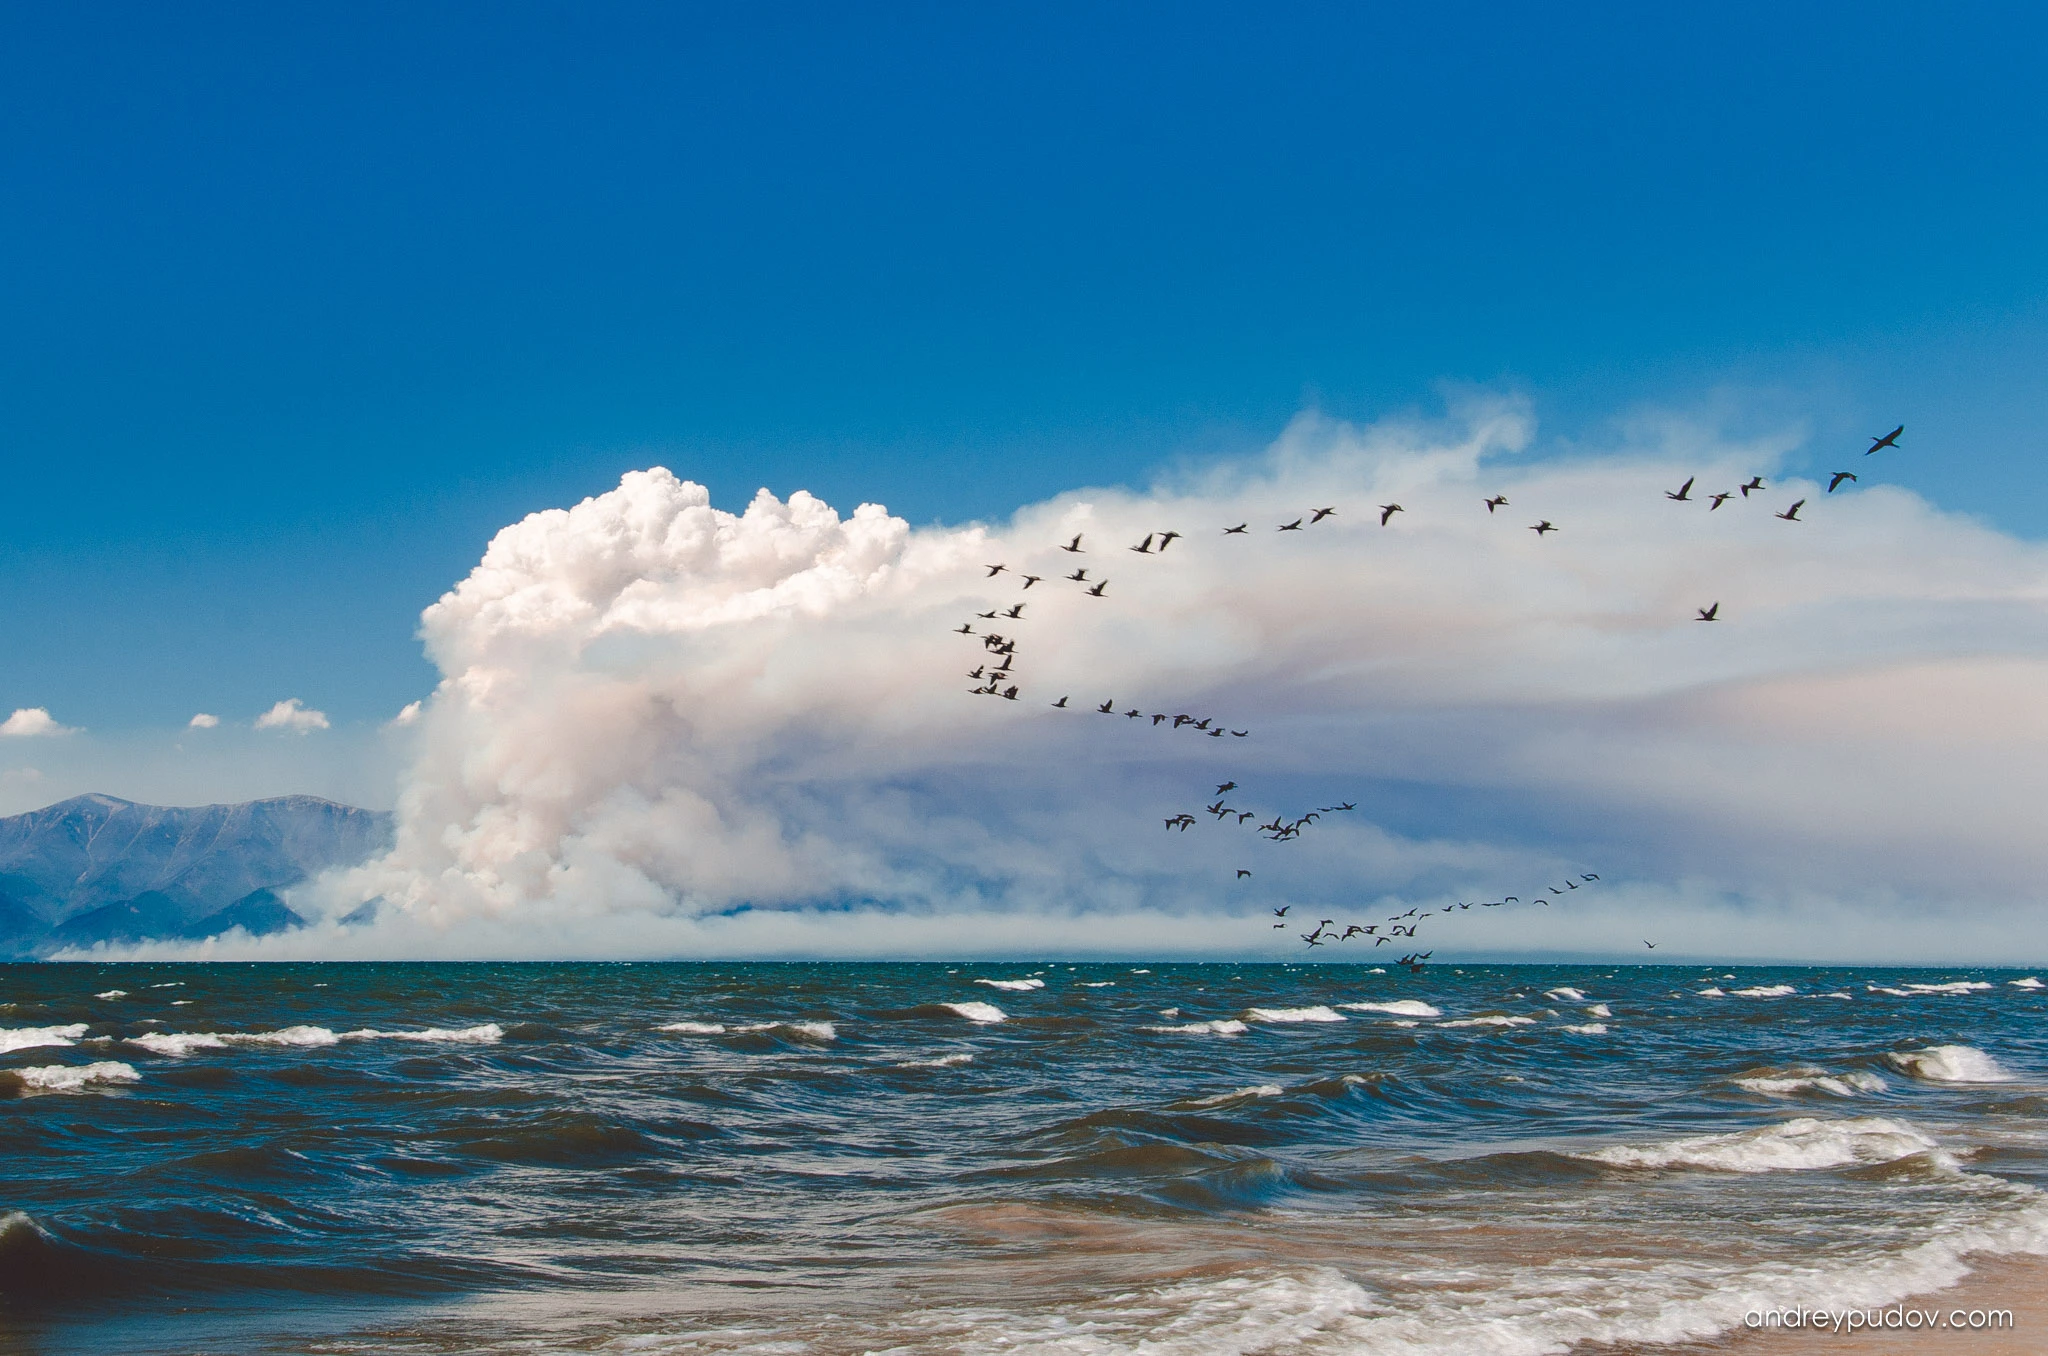 Lake Baikal - The Holy Nose Peninsula is on fire. Because of strong thunderstorms, since the end of July, violent fires have been raging in the mountains in the Baikal nature reserves. About 25,000 hectares of forest were affected by the fire.